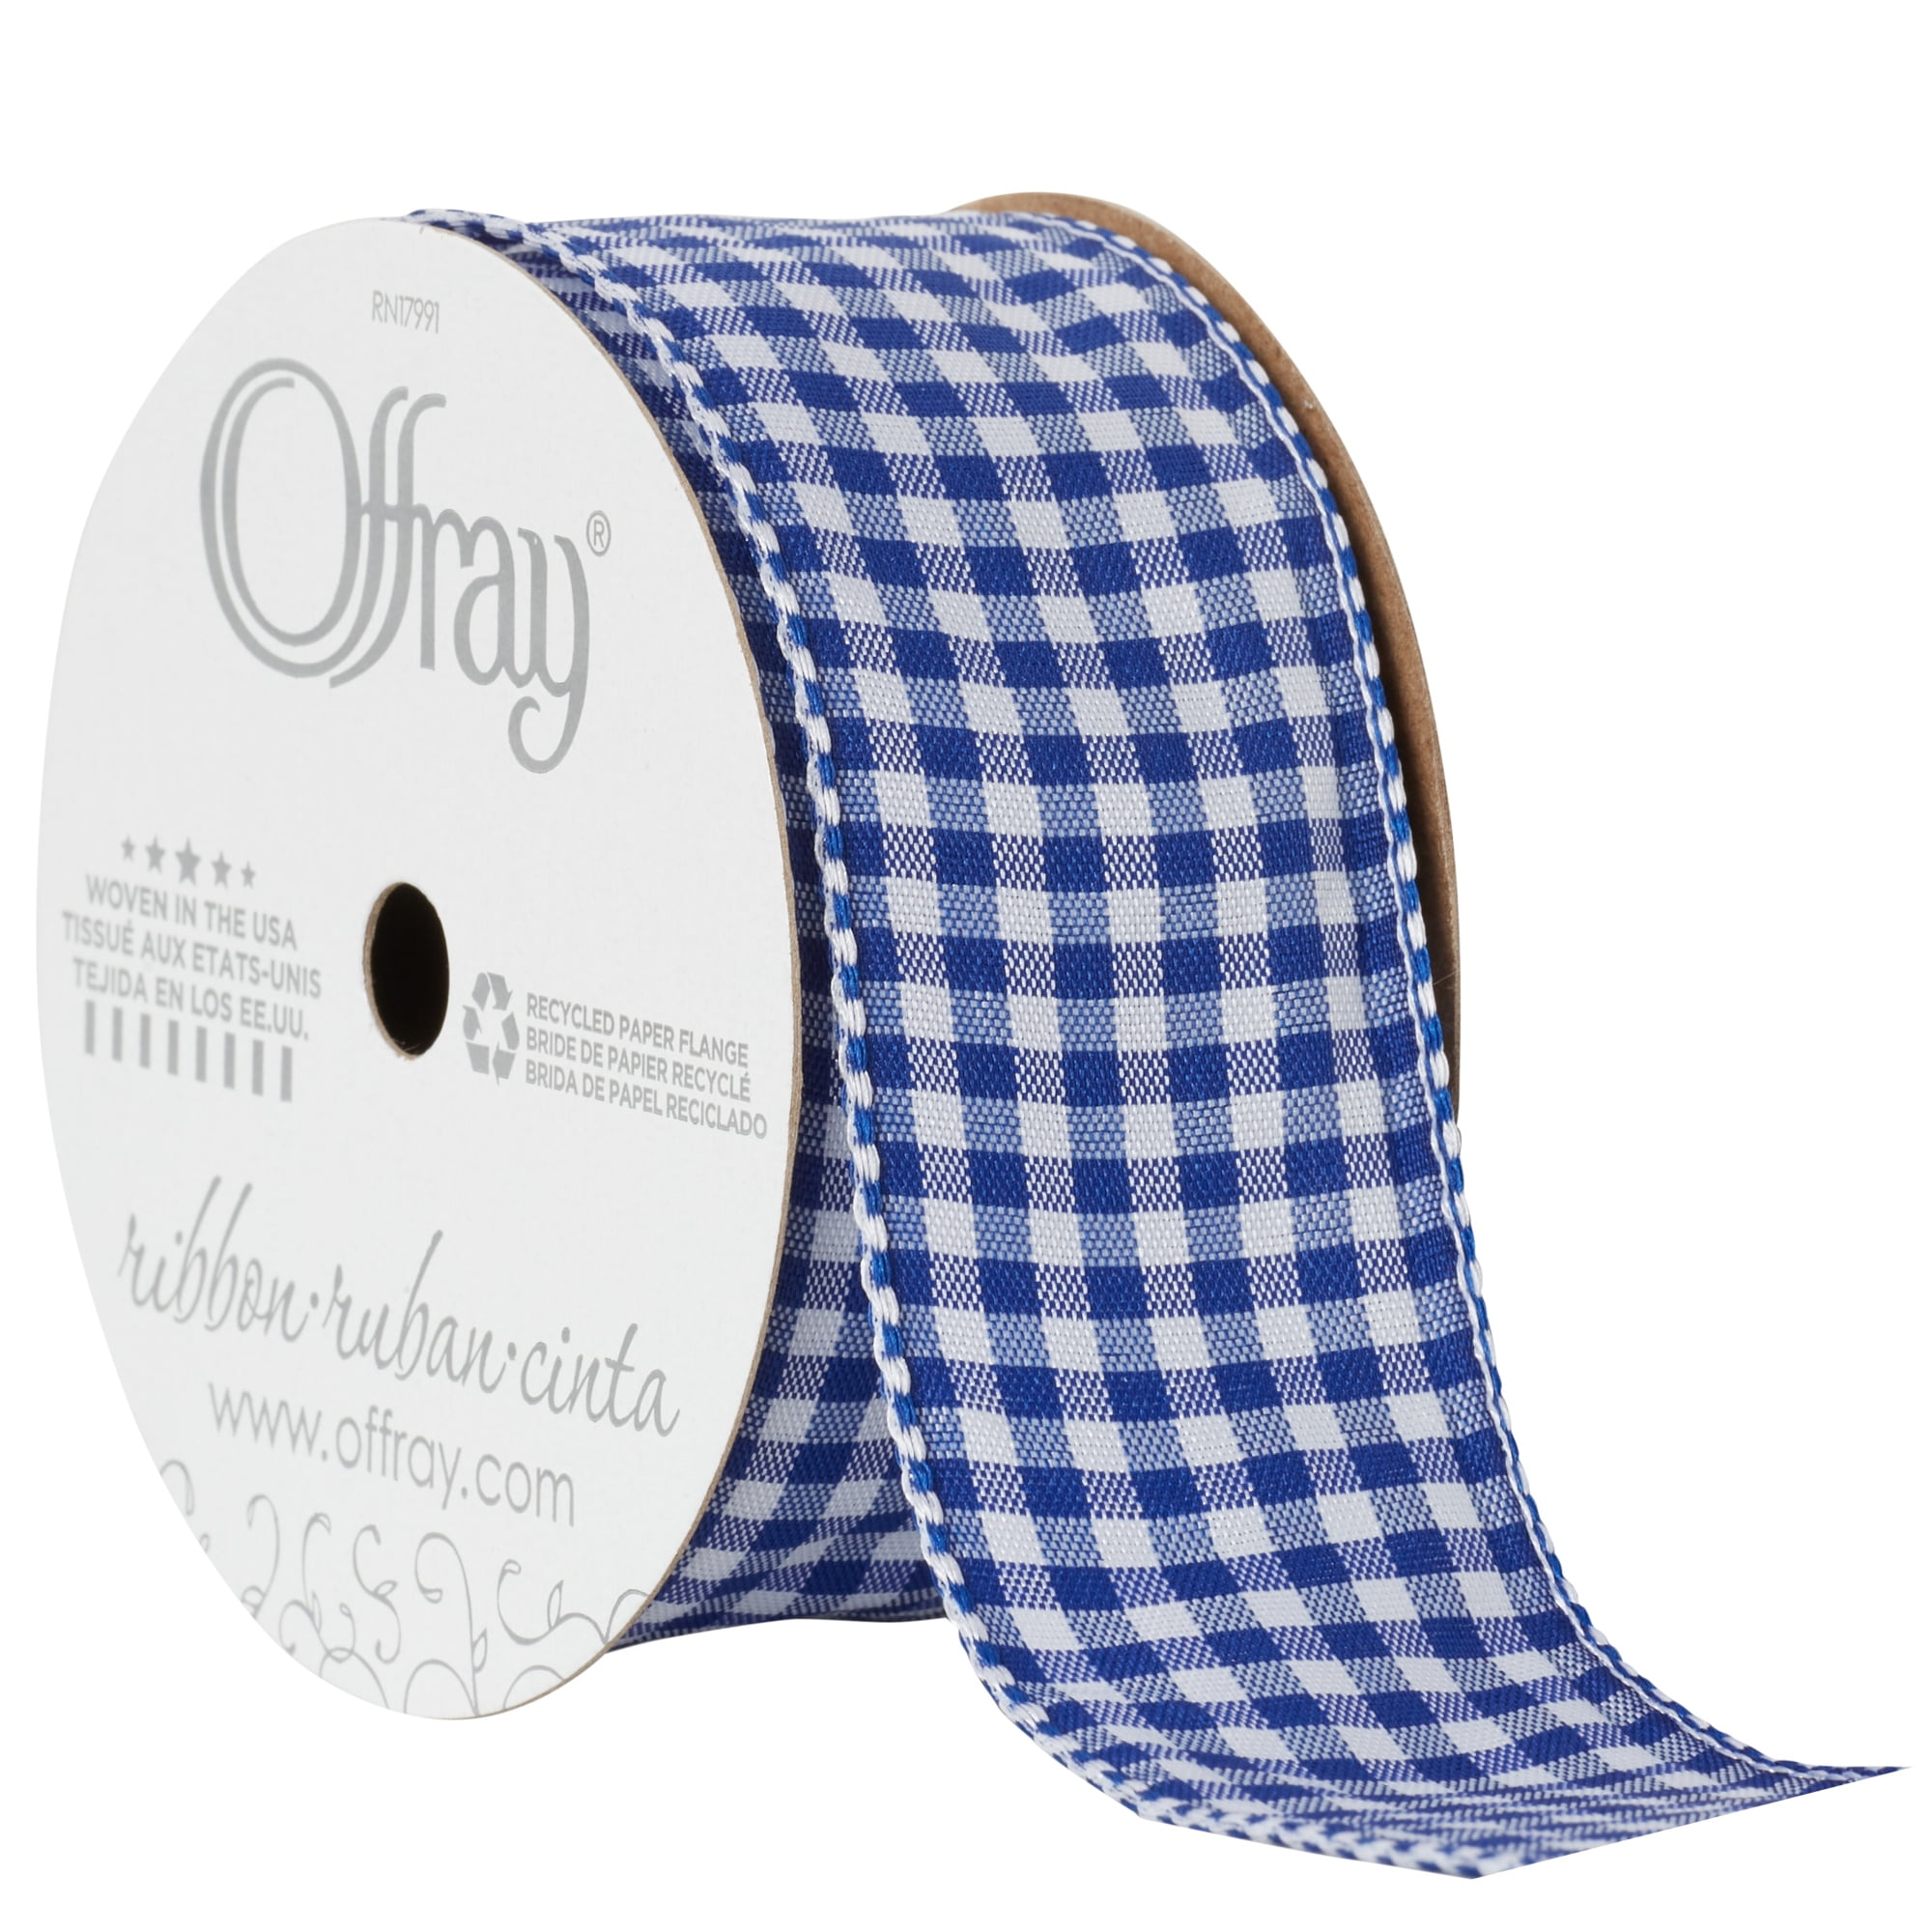 Offray Ribbon, Royal Blue 1 1/2 inch Gingham Check Woven Ribbon for Crafts, Gifting, and Wedding, 9 feet, 1 Each